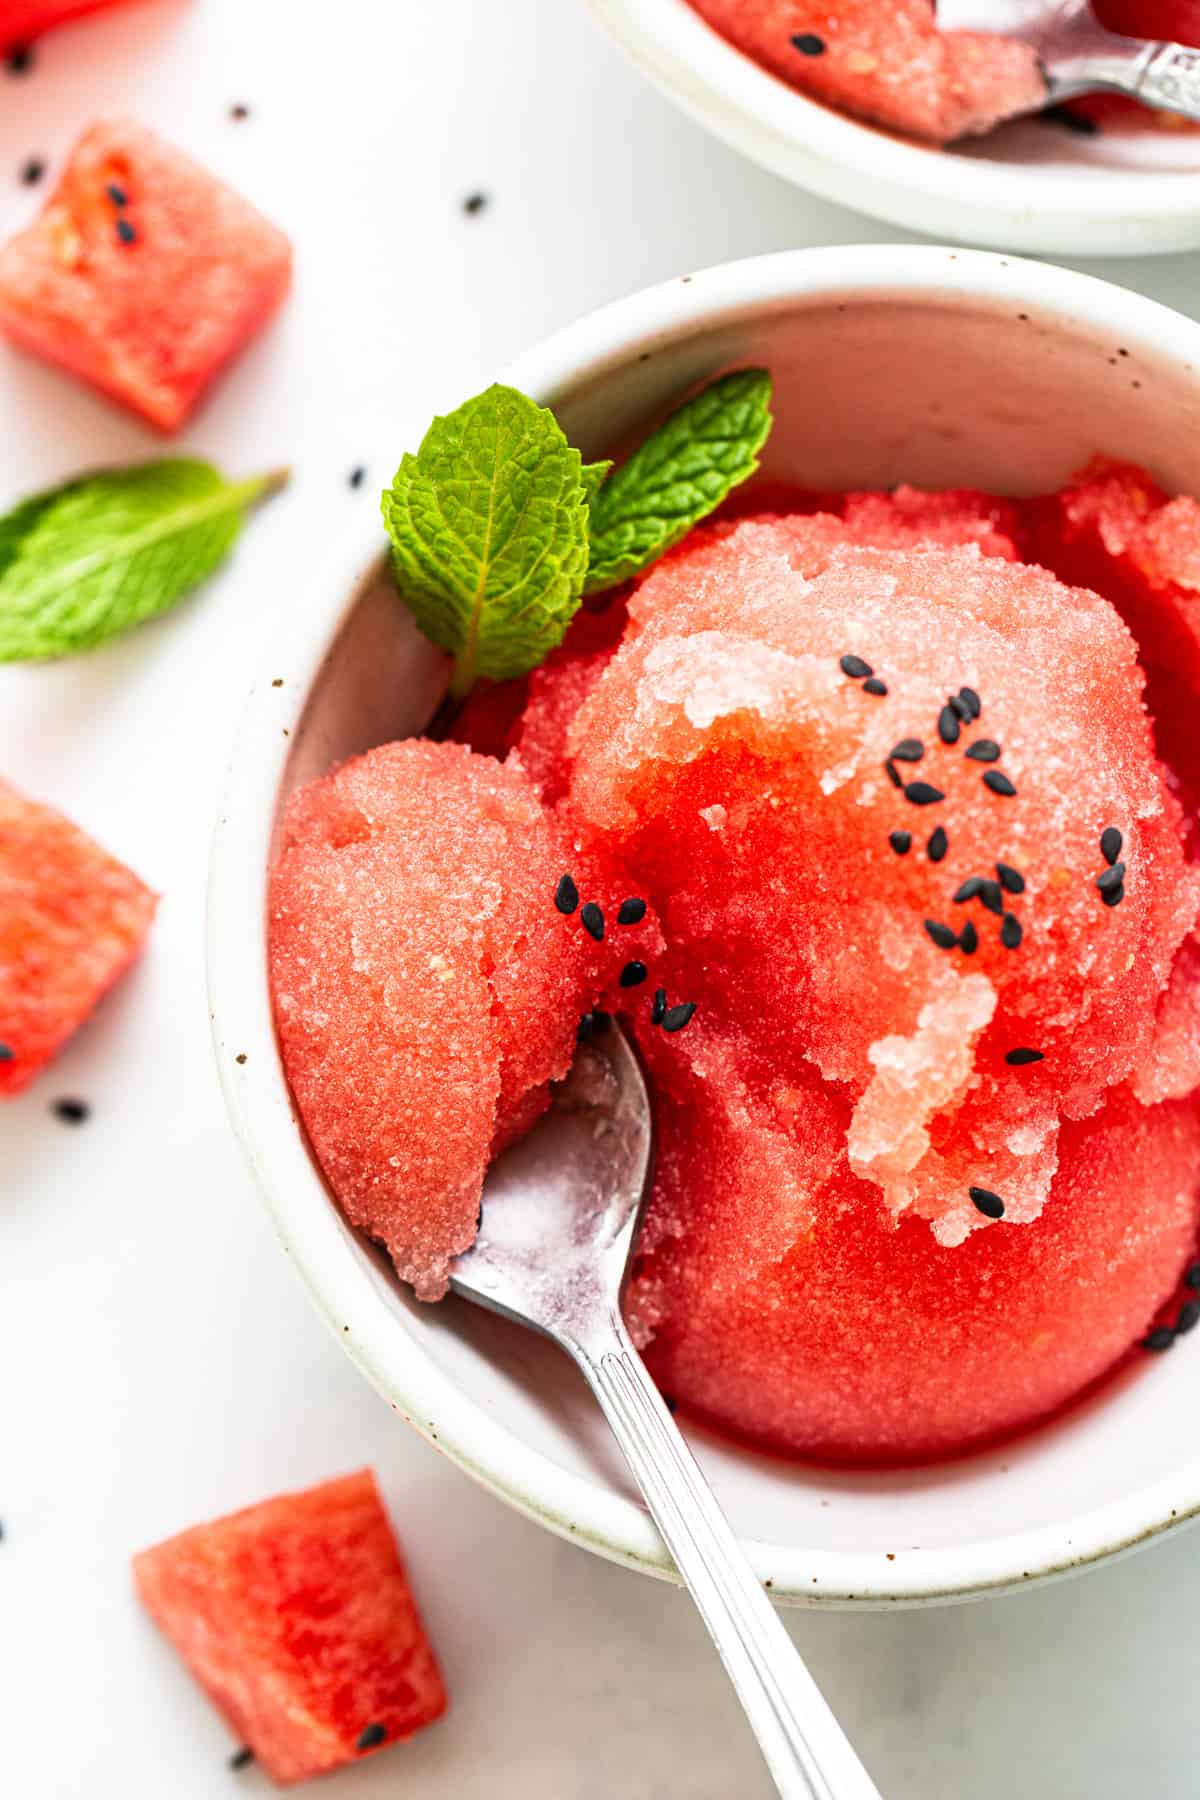 Bowl of watermelon sorbet garnished with mint leaves and black sesame seeds, with a spoon and scattered watermelon pieces around on a white background.